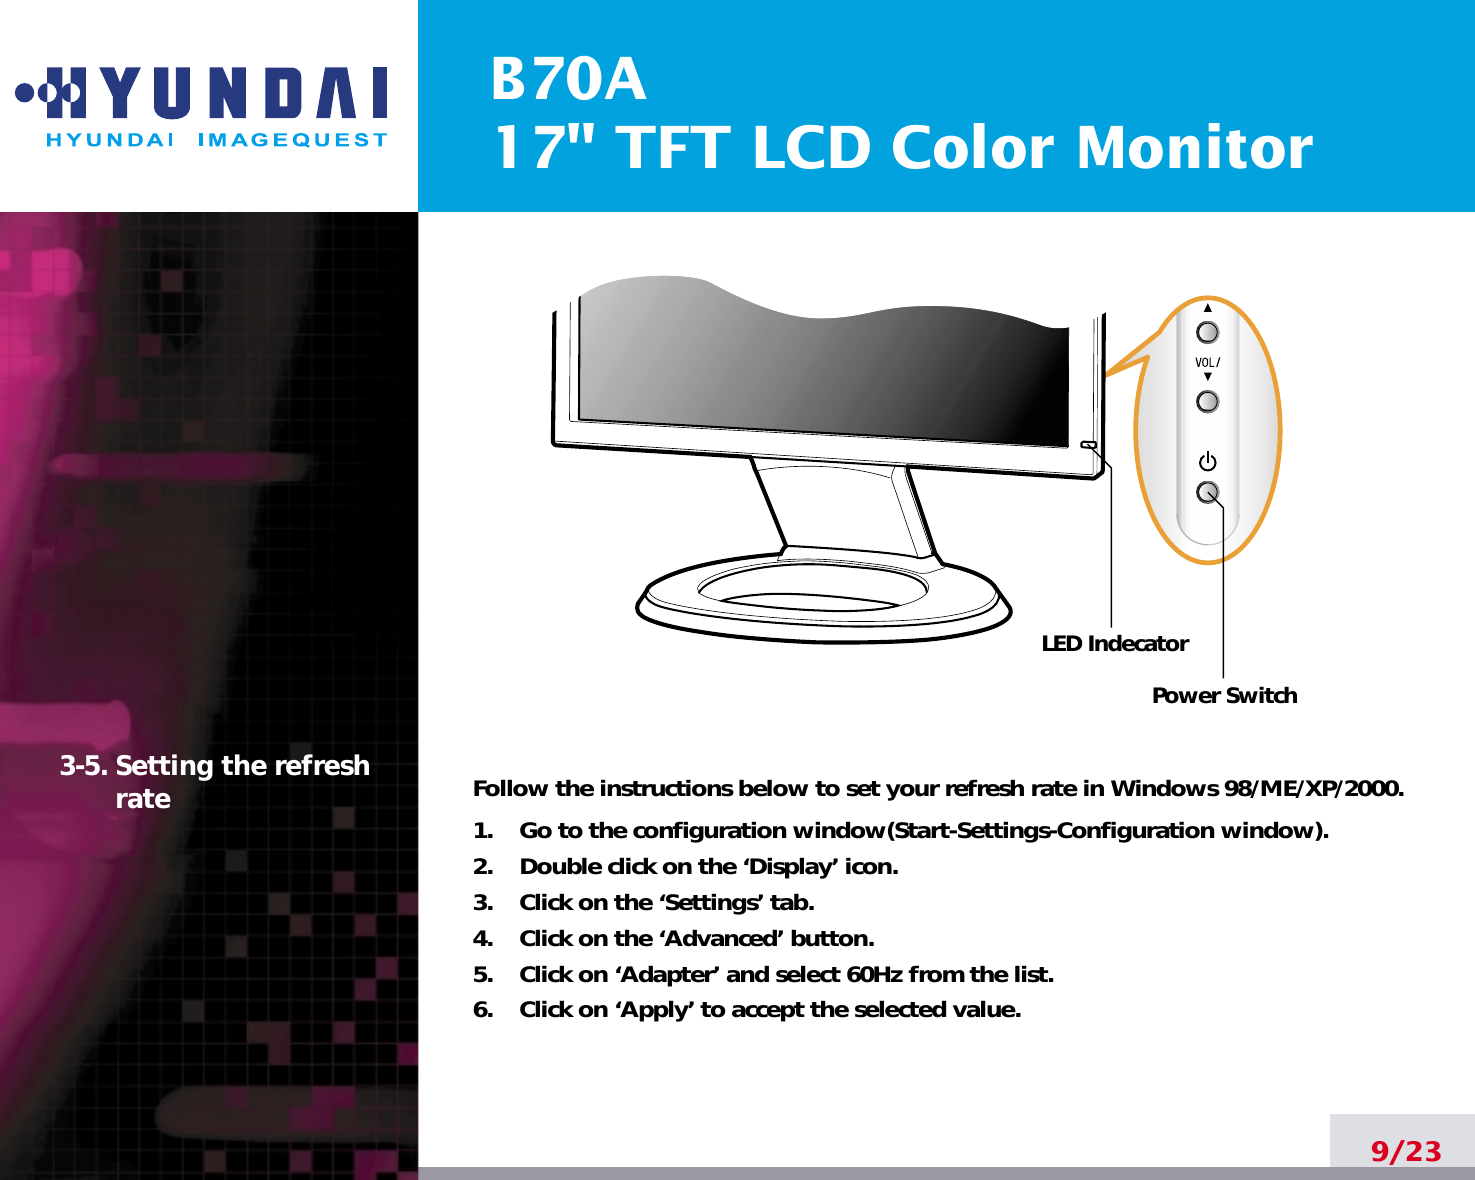 B70A17&quot; TFT LCD Color Monitor9/233-5. Setting the refreshrate Follow the instructions below to set your refresh rate in Windows 98/ME/XP/2000.1.    Go to the configuration window(Start-Settings-Configuration window).2.    Double click on the ‘Display’ icon.3.    Click on the ‘Settings’ tab.4.    Click on the ‘Advanced’ button.5.    Click on ‘Adapter’ and select 60Hz from the list.6.    Click on ‘Apply’ to accept the selected value.Power SwitchLED Indecator